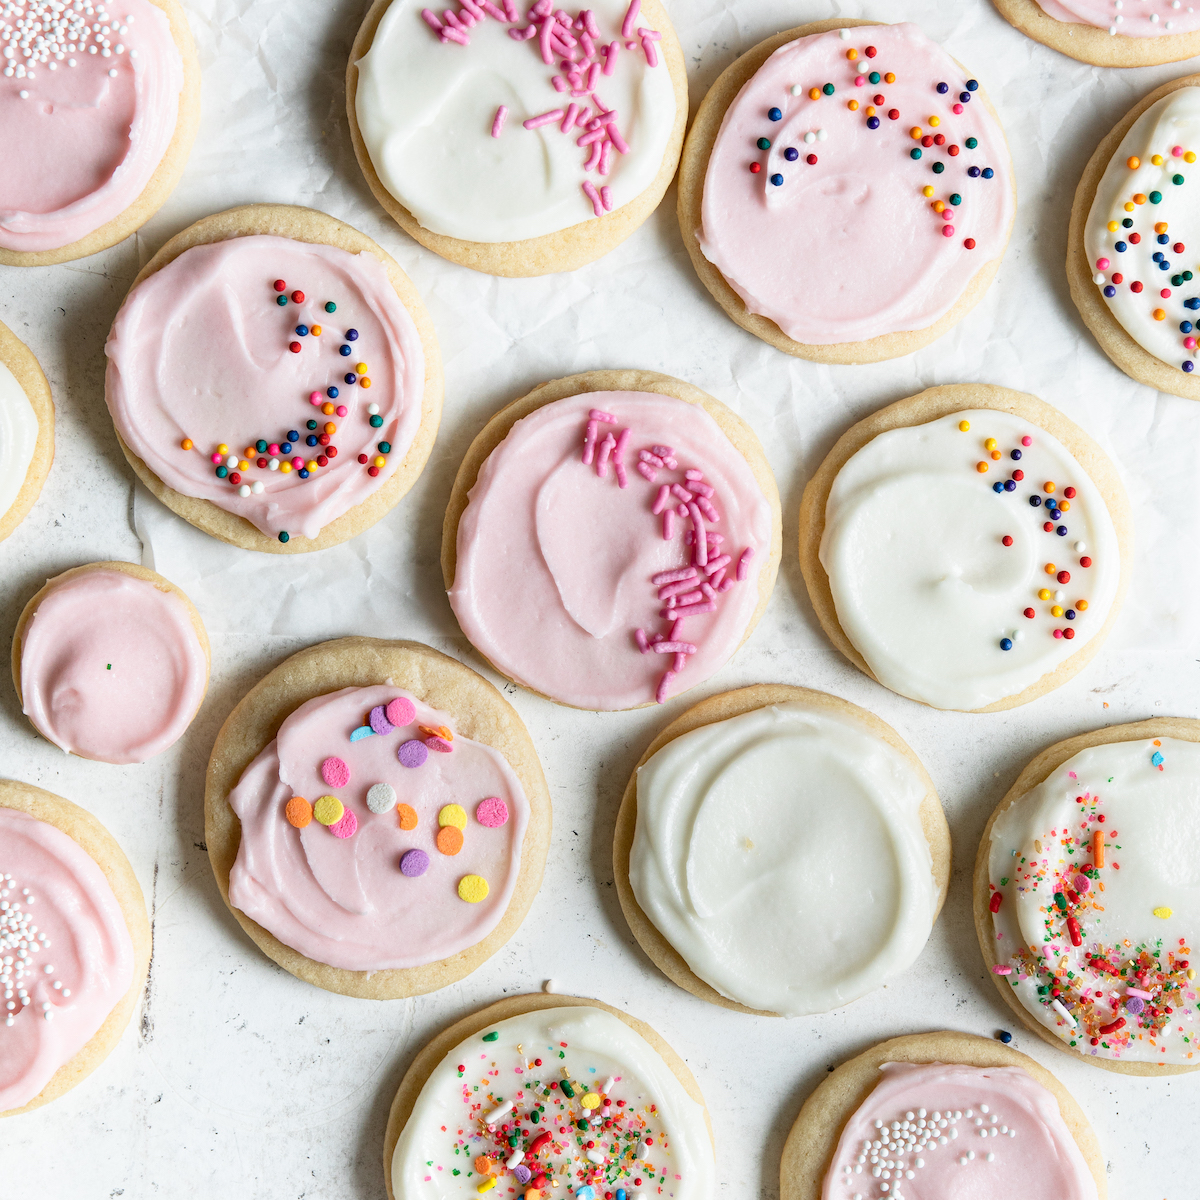 A bunch of sugar cookies on a white surface, some with pink frosting and others with white frosting.